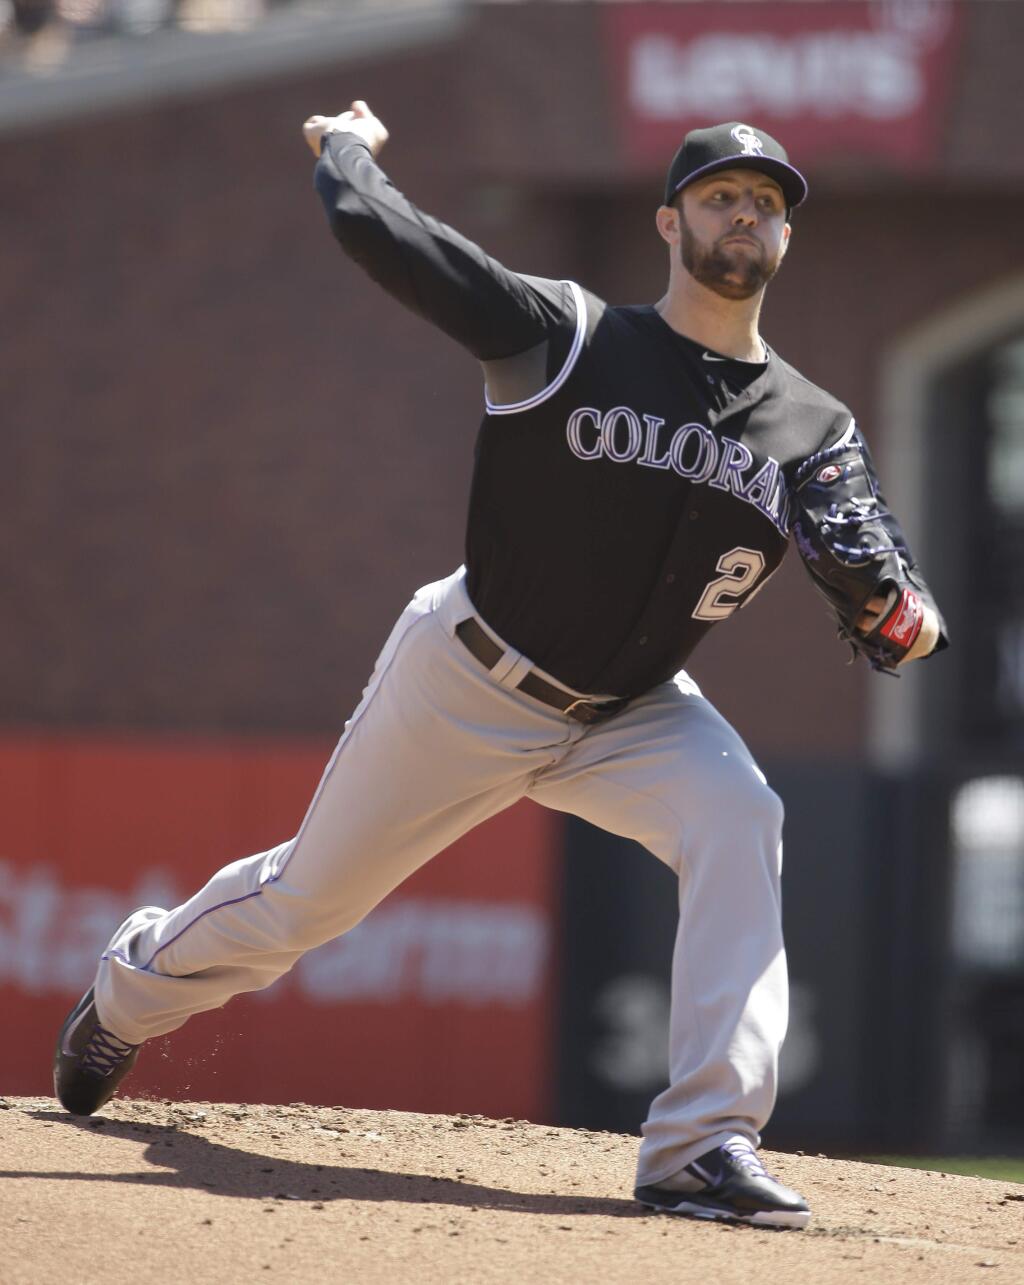 Colorado Rockies starting pitcher Jordan Lyles throws against the San Francisco Giants in the first inning of their game Thursday, Aug. 28, 2014, in San Francisco. (AP Photo/Eric Risberg)